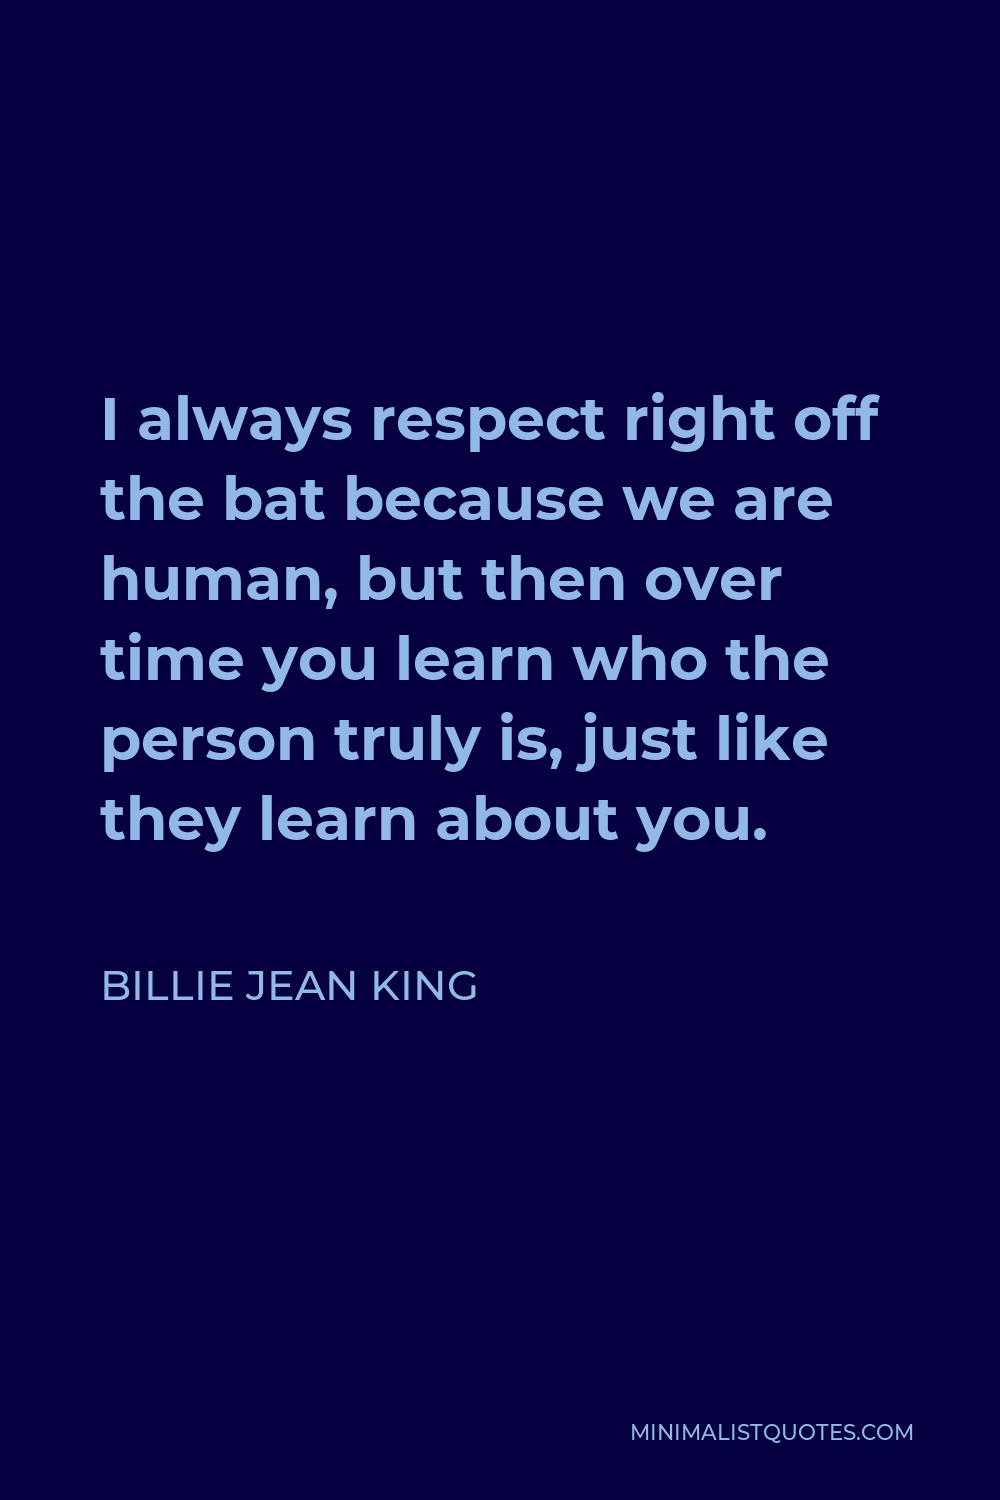 Billie Jean King Quote - I always respect right off the bat because we are human, but then over time you learn who the person truly is, just like they learn about you.